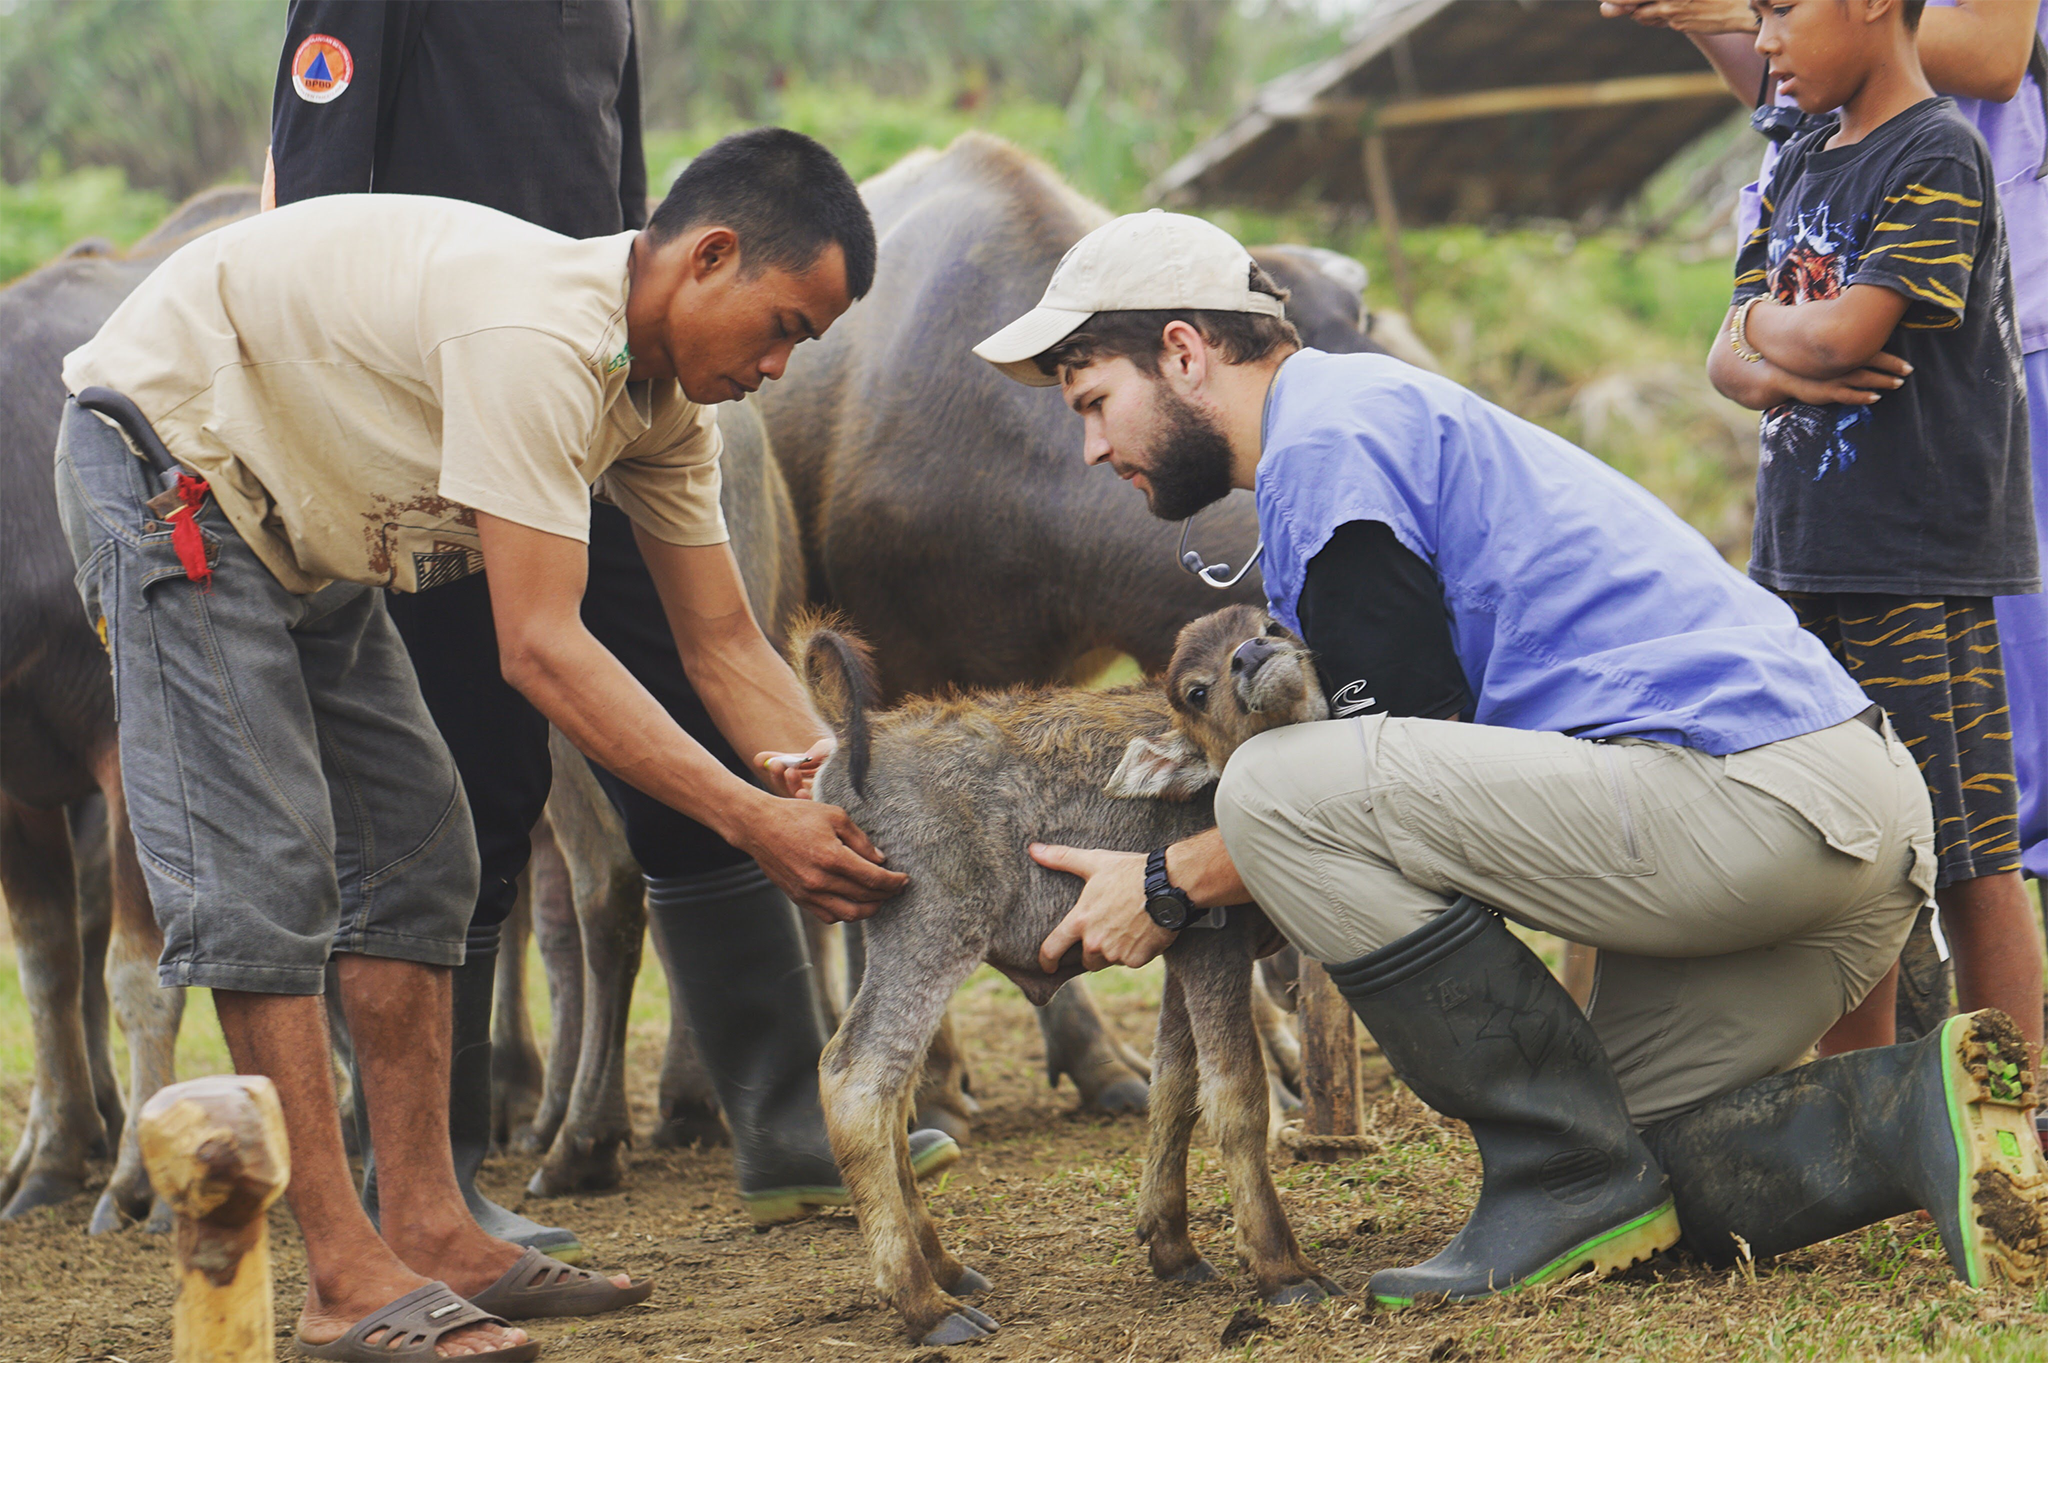 Cornell veterinary student and local community member with calf in Indonesia